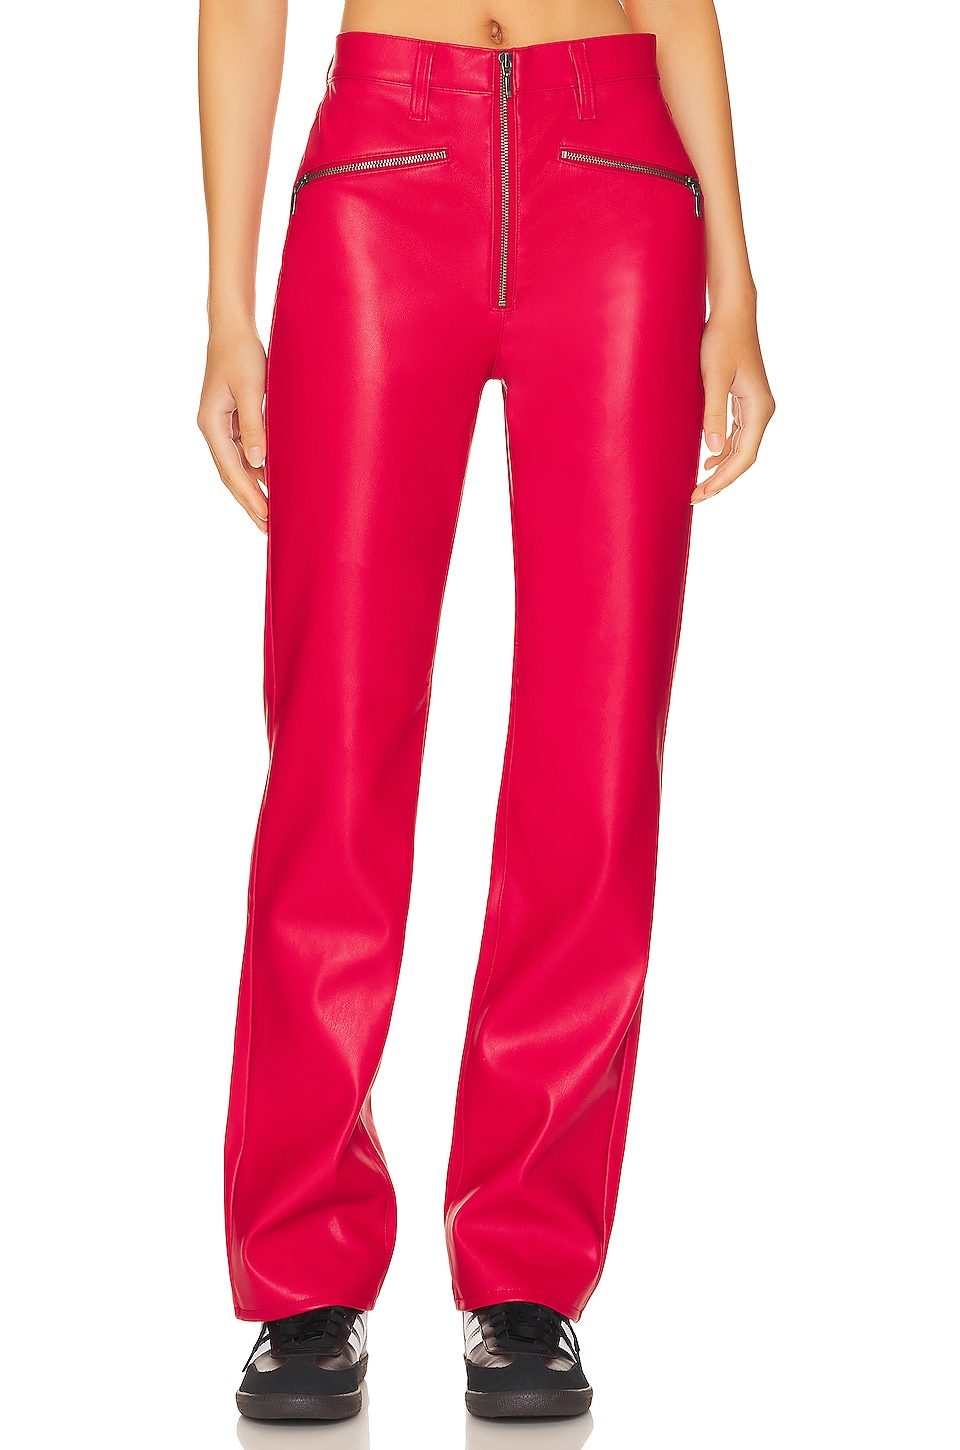 Shop HighRise Faux Patent Leather Pants for Women from latest collection  at Forever 21  323544